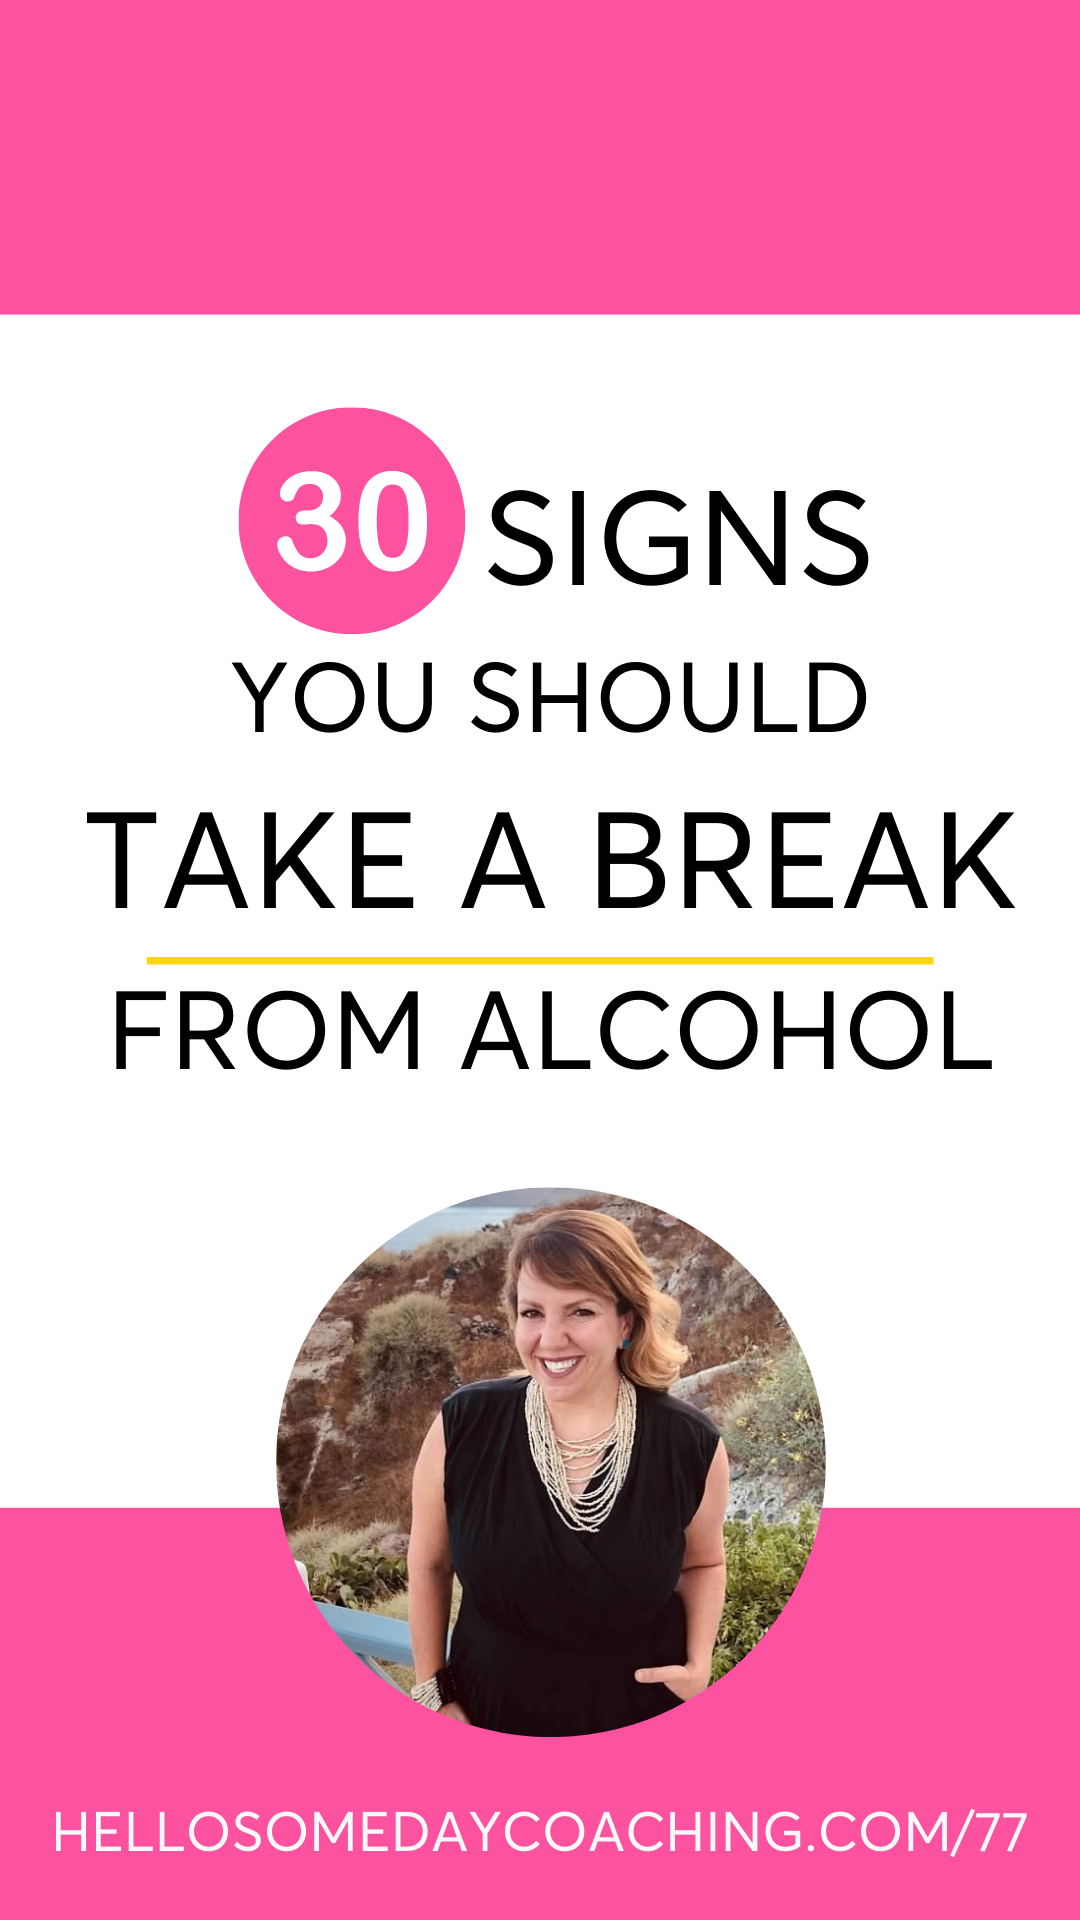 30 signs women should take a break from drinking alcohol